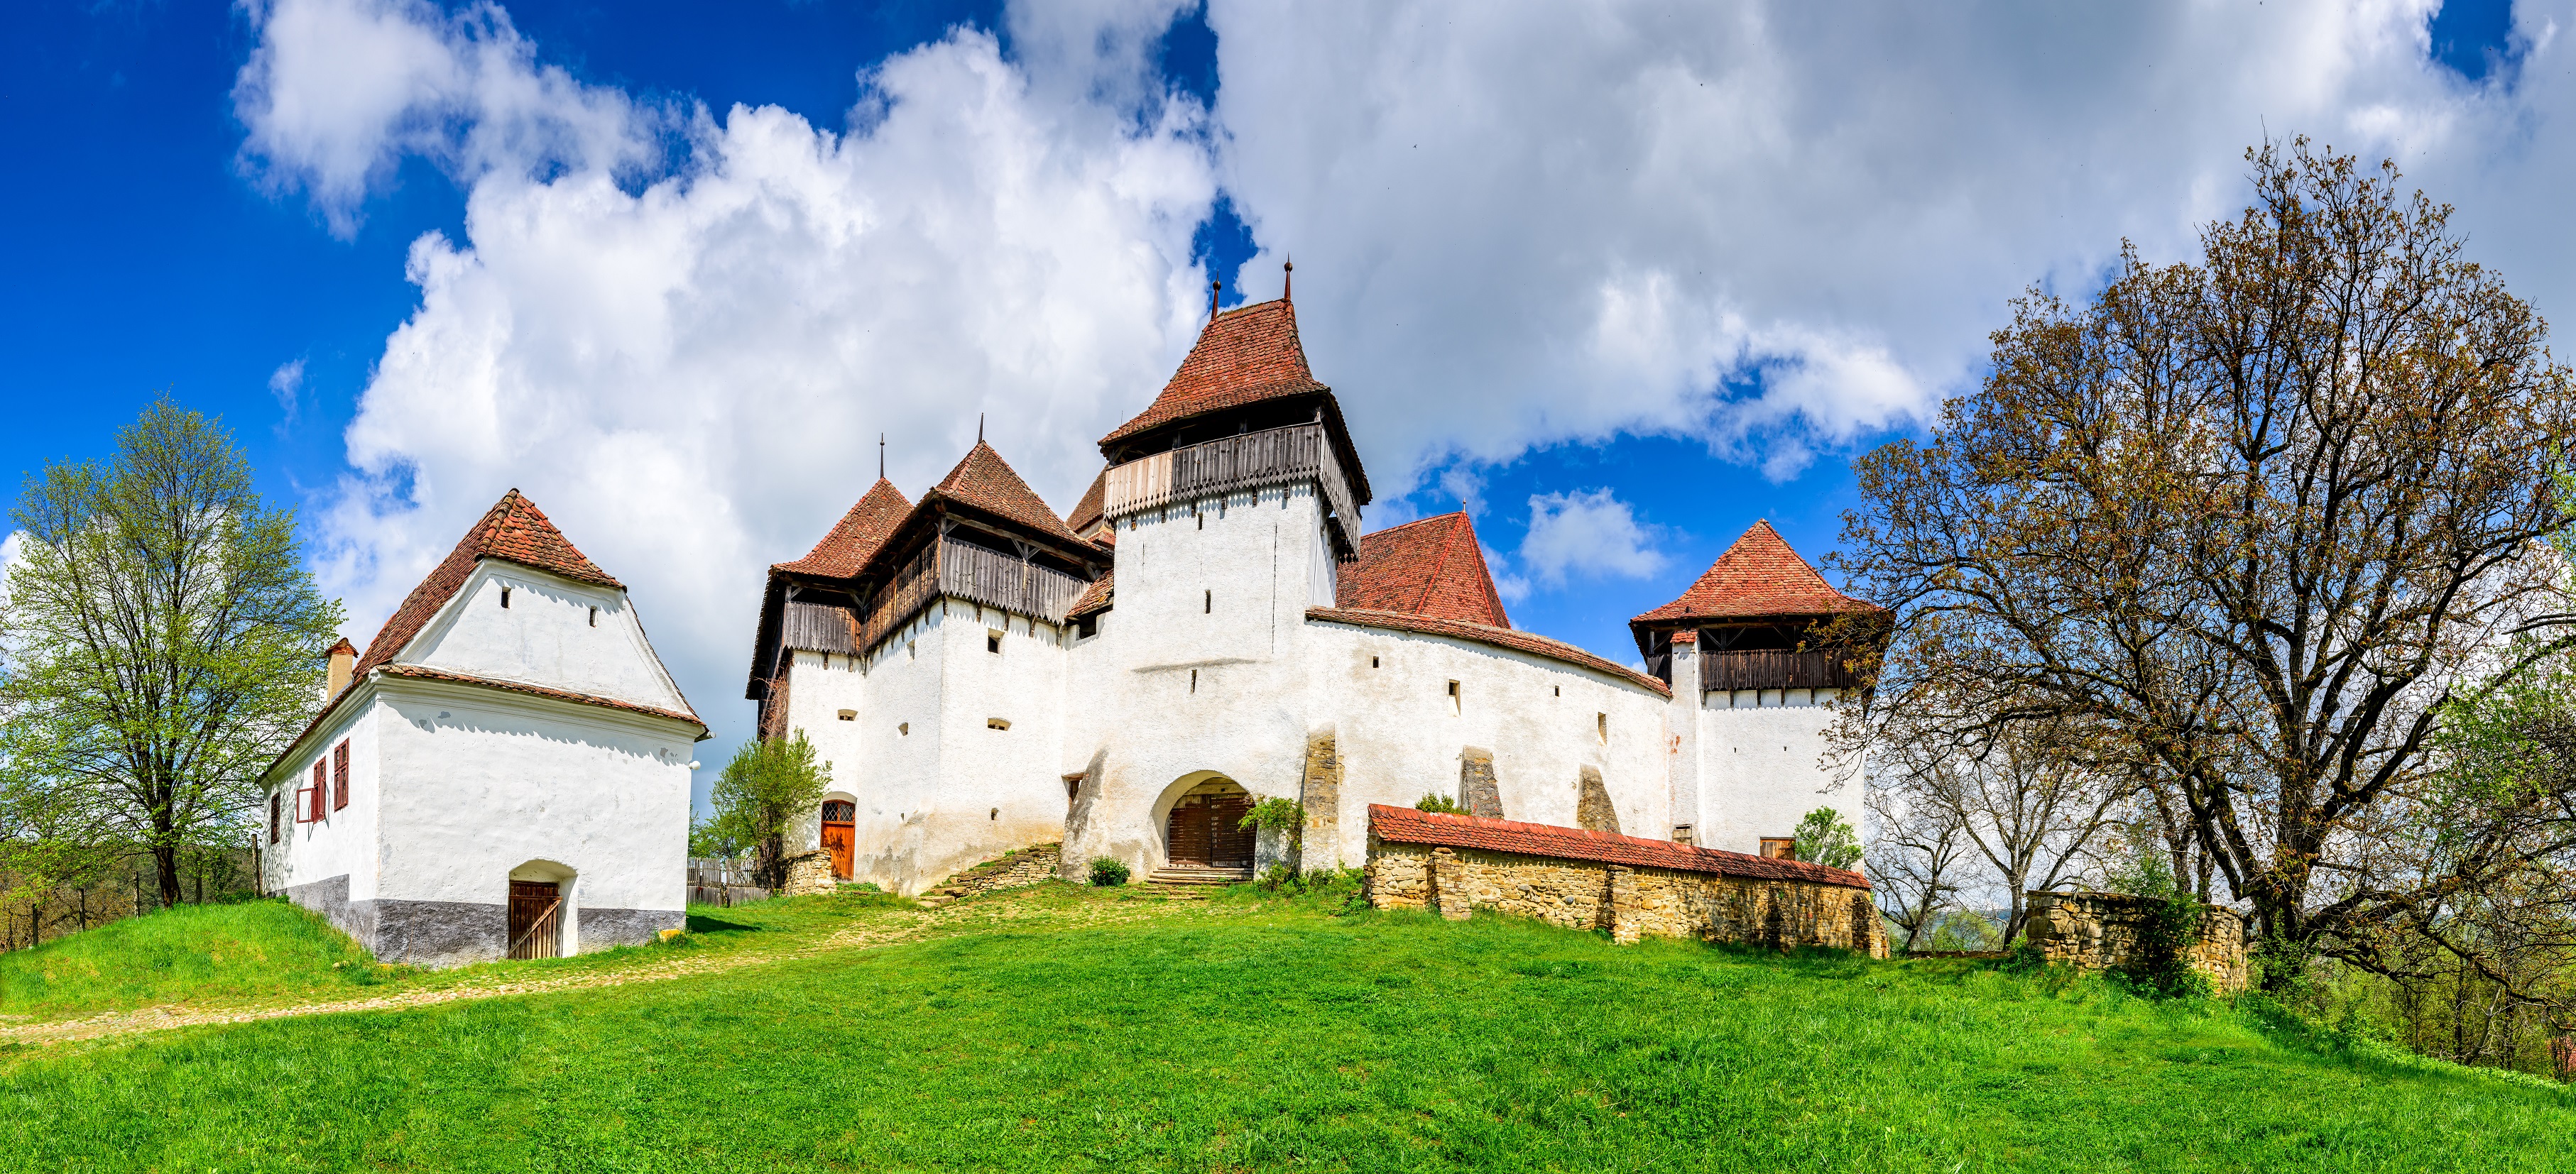 Top Spanish daily recommends readers 15 charming villages in Romania